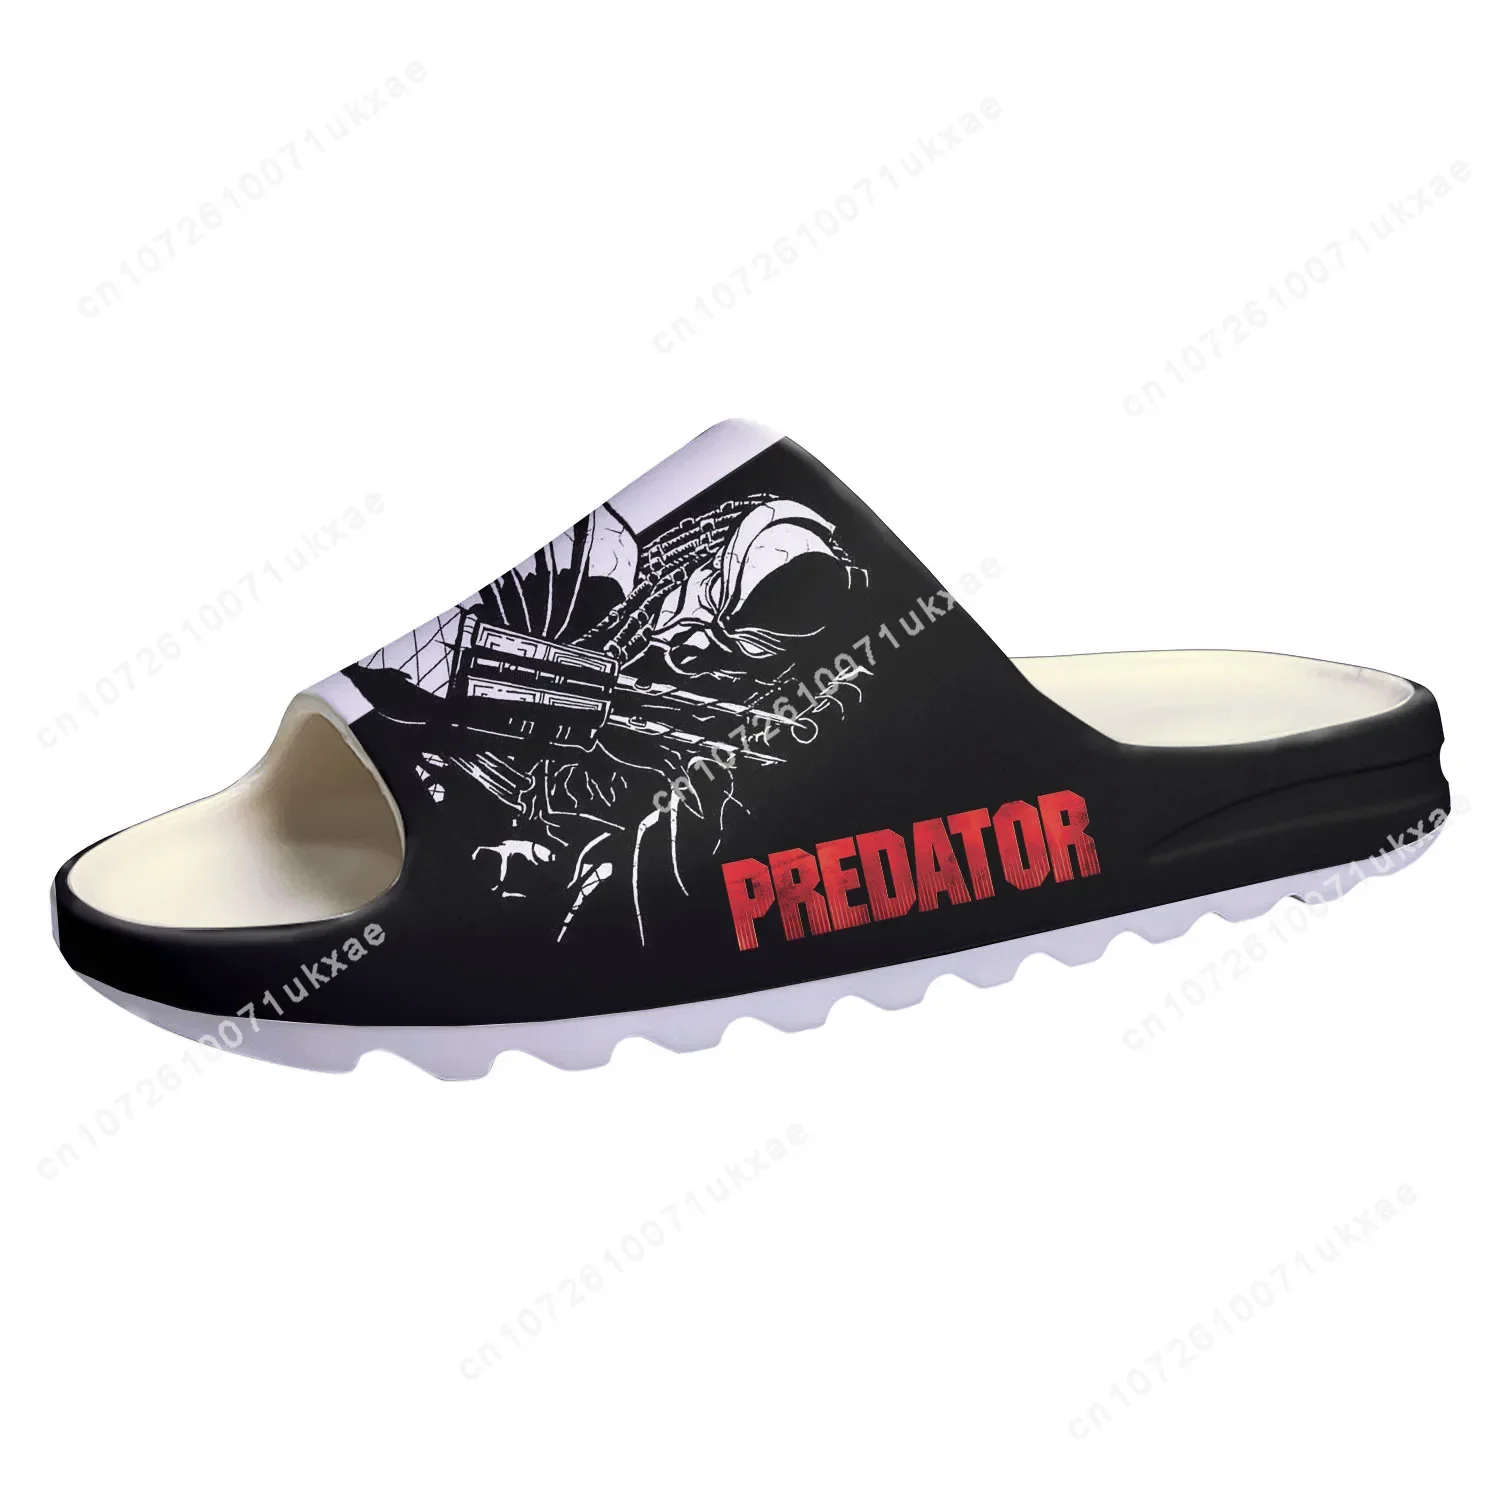 The Predator Alien Movie Soft Sole Sllipers Home Clogs Customized Step On Water Shoes Mens Womens Teenager Step in Sandals